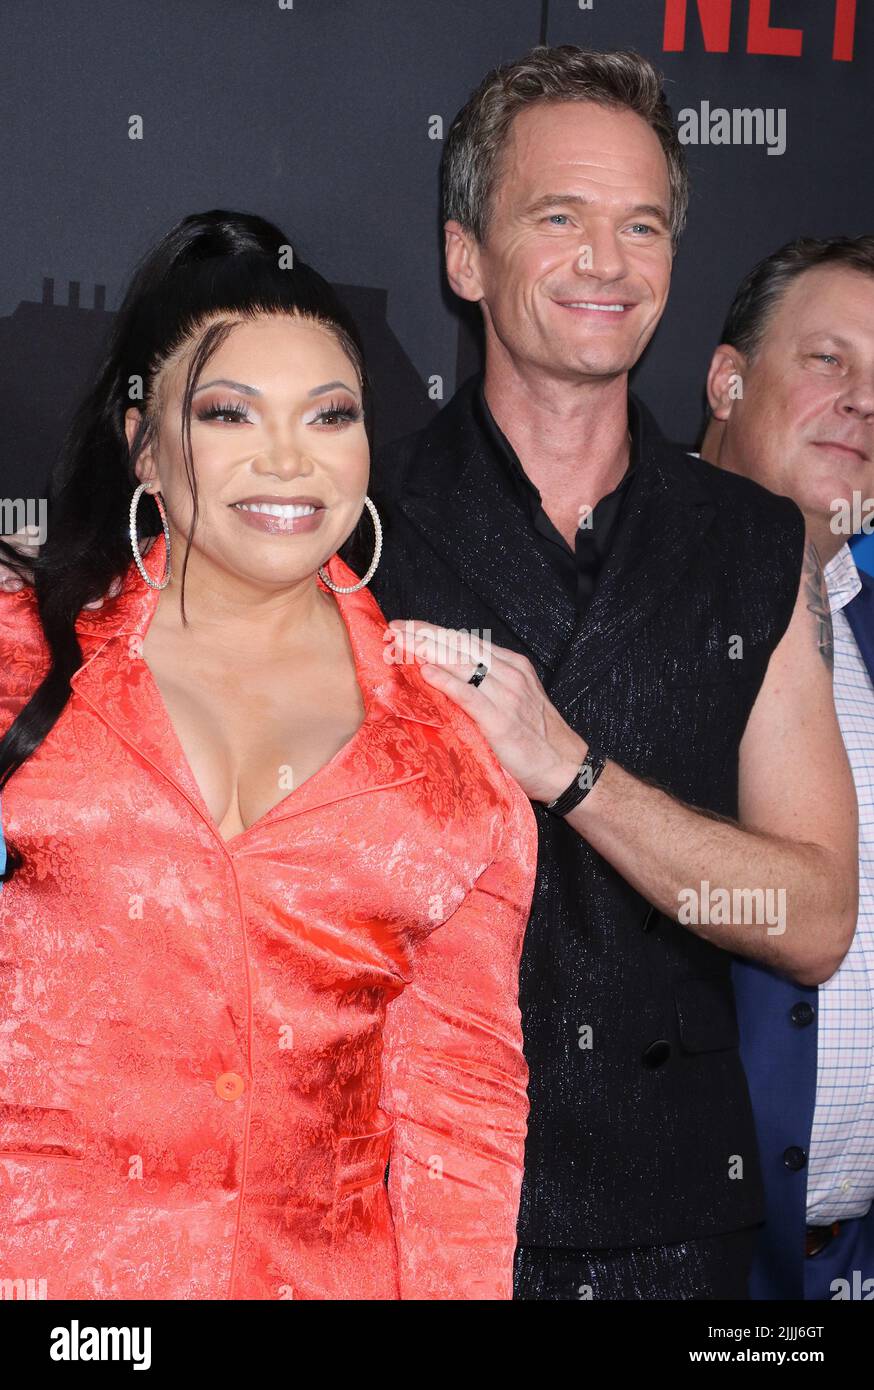 New York, NY, USA. 26th July, 2022. Tisha Campbell and Neil Patrick Harris at the Netflix Premiere Of Uncoupled at The Paris Theatre in New York City on July 26, 2022. Credit: Rw/Media Punch/Alamy Live News Stock Photo